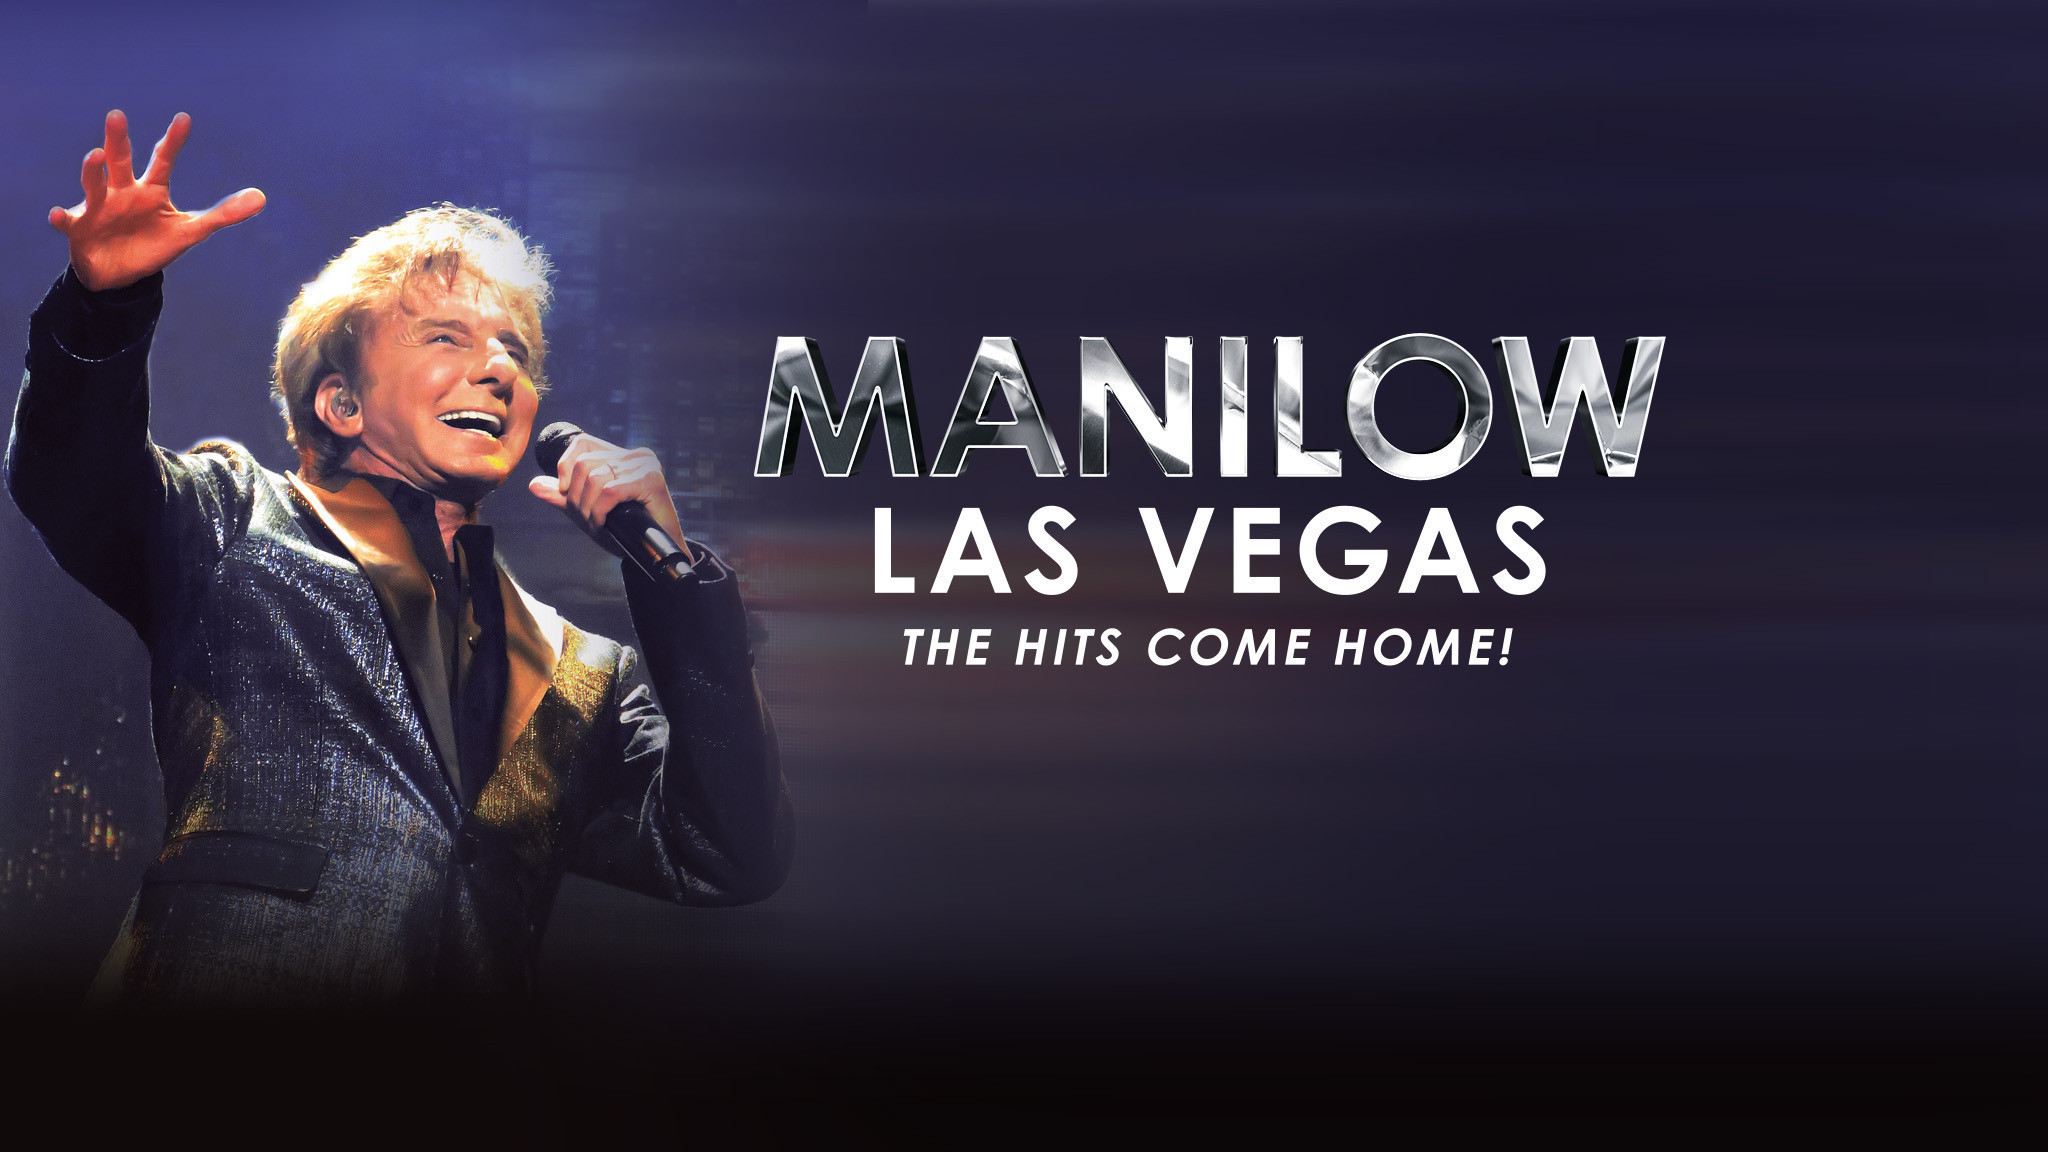 Barry Manilow Tickets Manilow Las Vegas The Hits Come Home